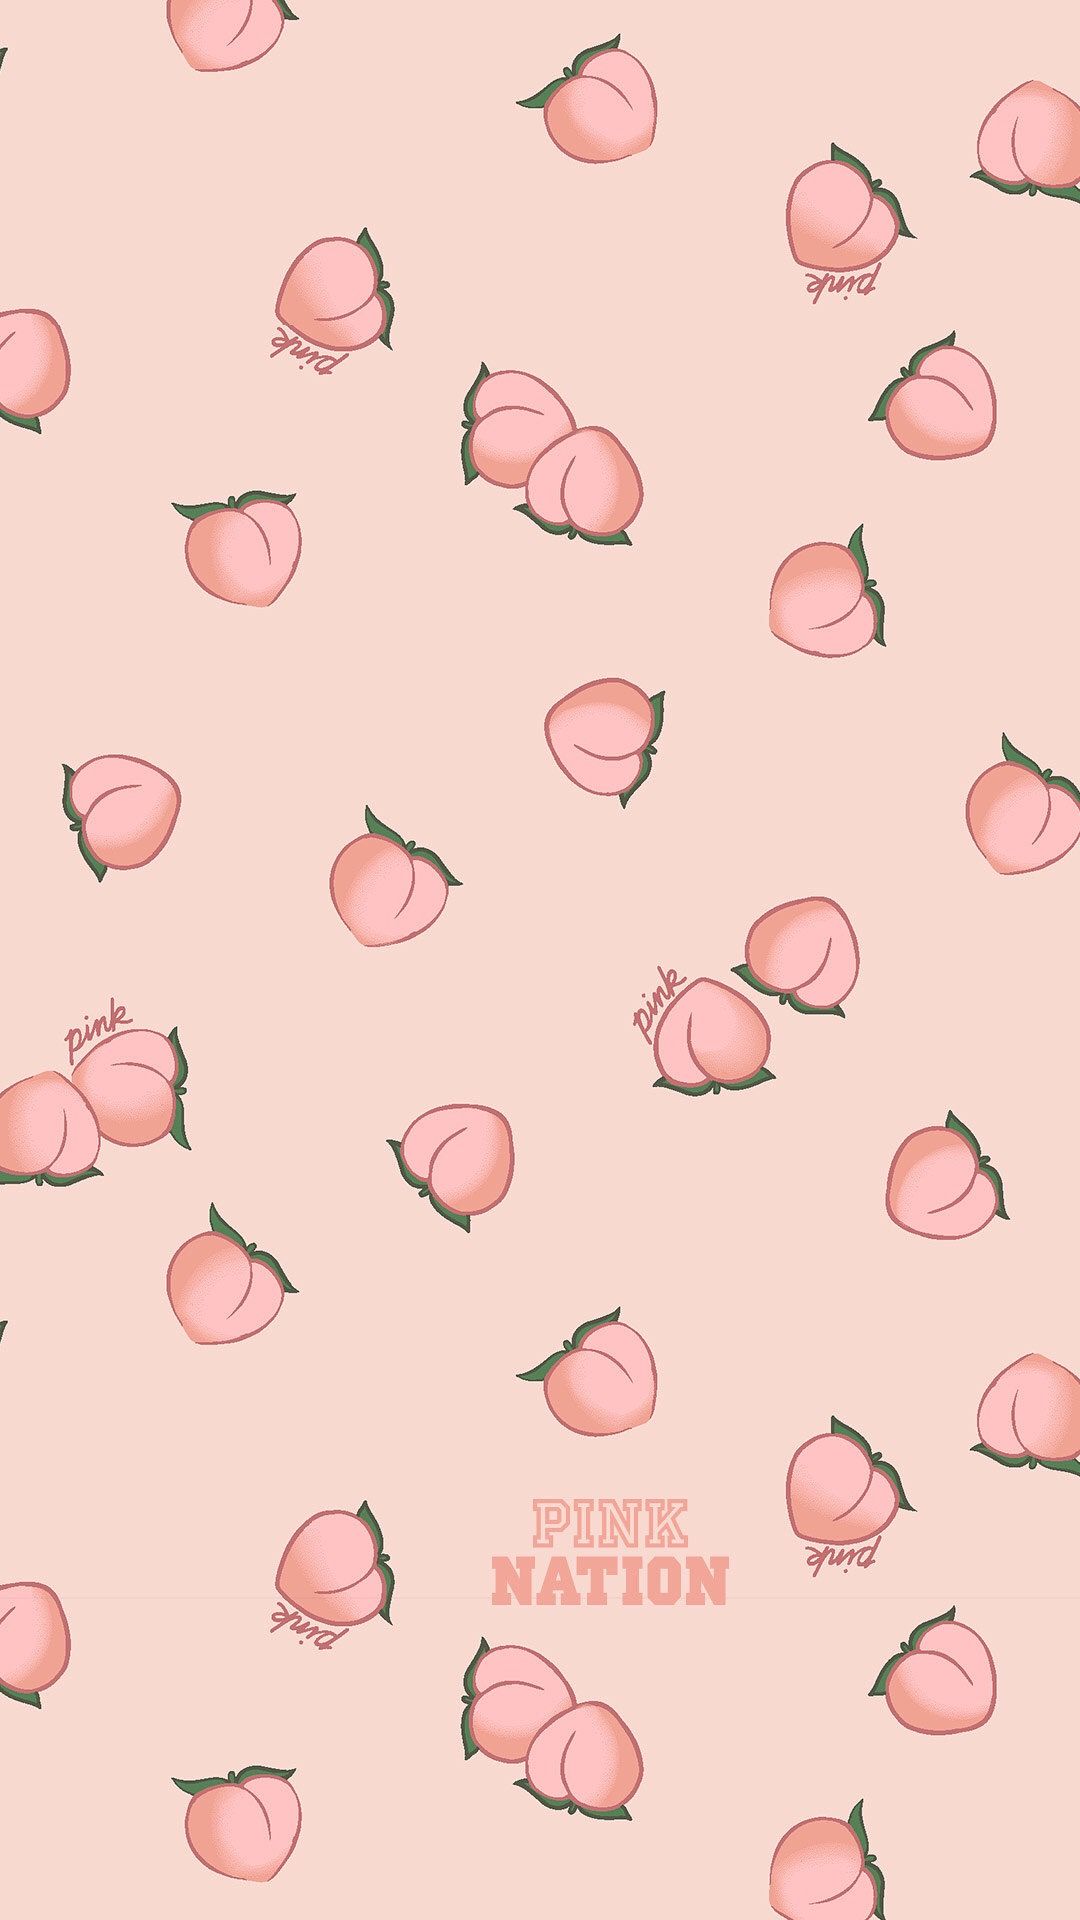 Peach Aesthetic Wallpaper Aesthetic Wallpapers More W